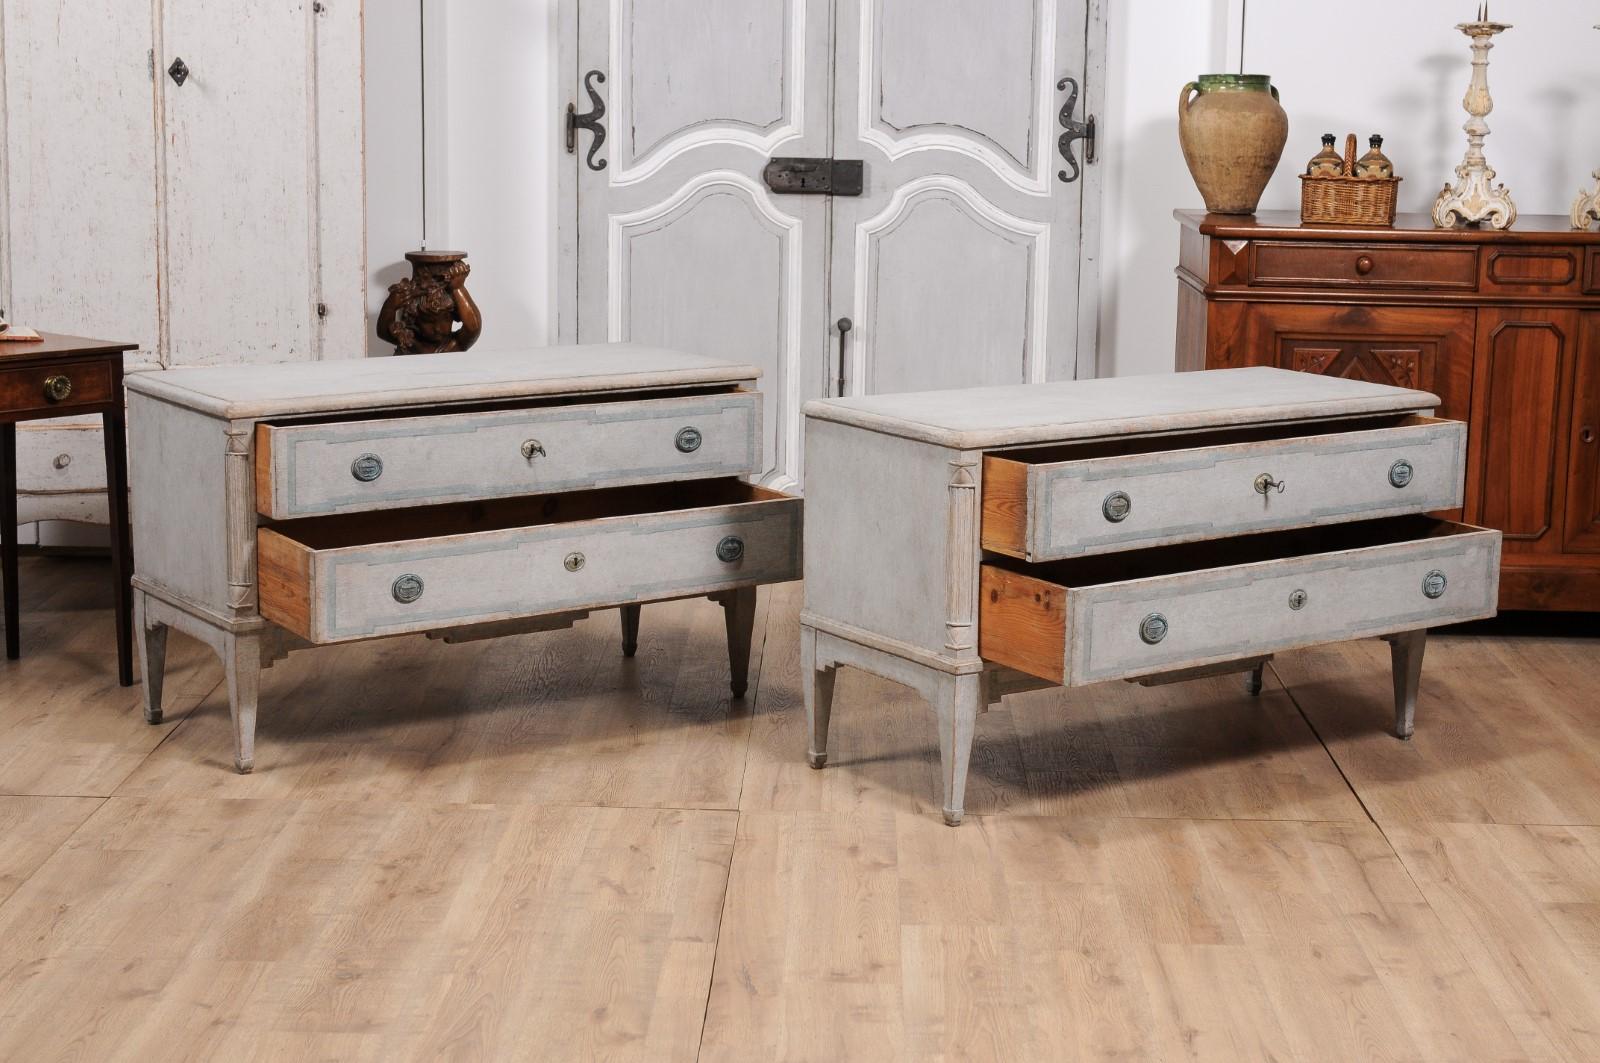 Danish 1820s Light Gray Painted Two-Drawer Chests with Semi-Columns, a Pair In Good Condition For Sale In Atlanta, GA